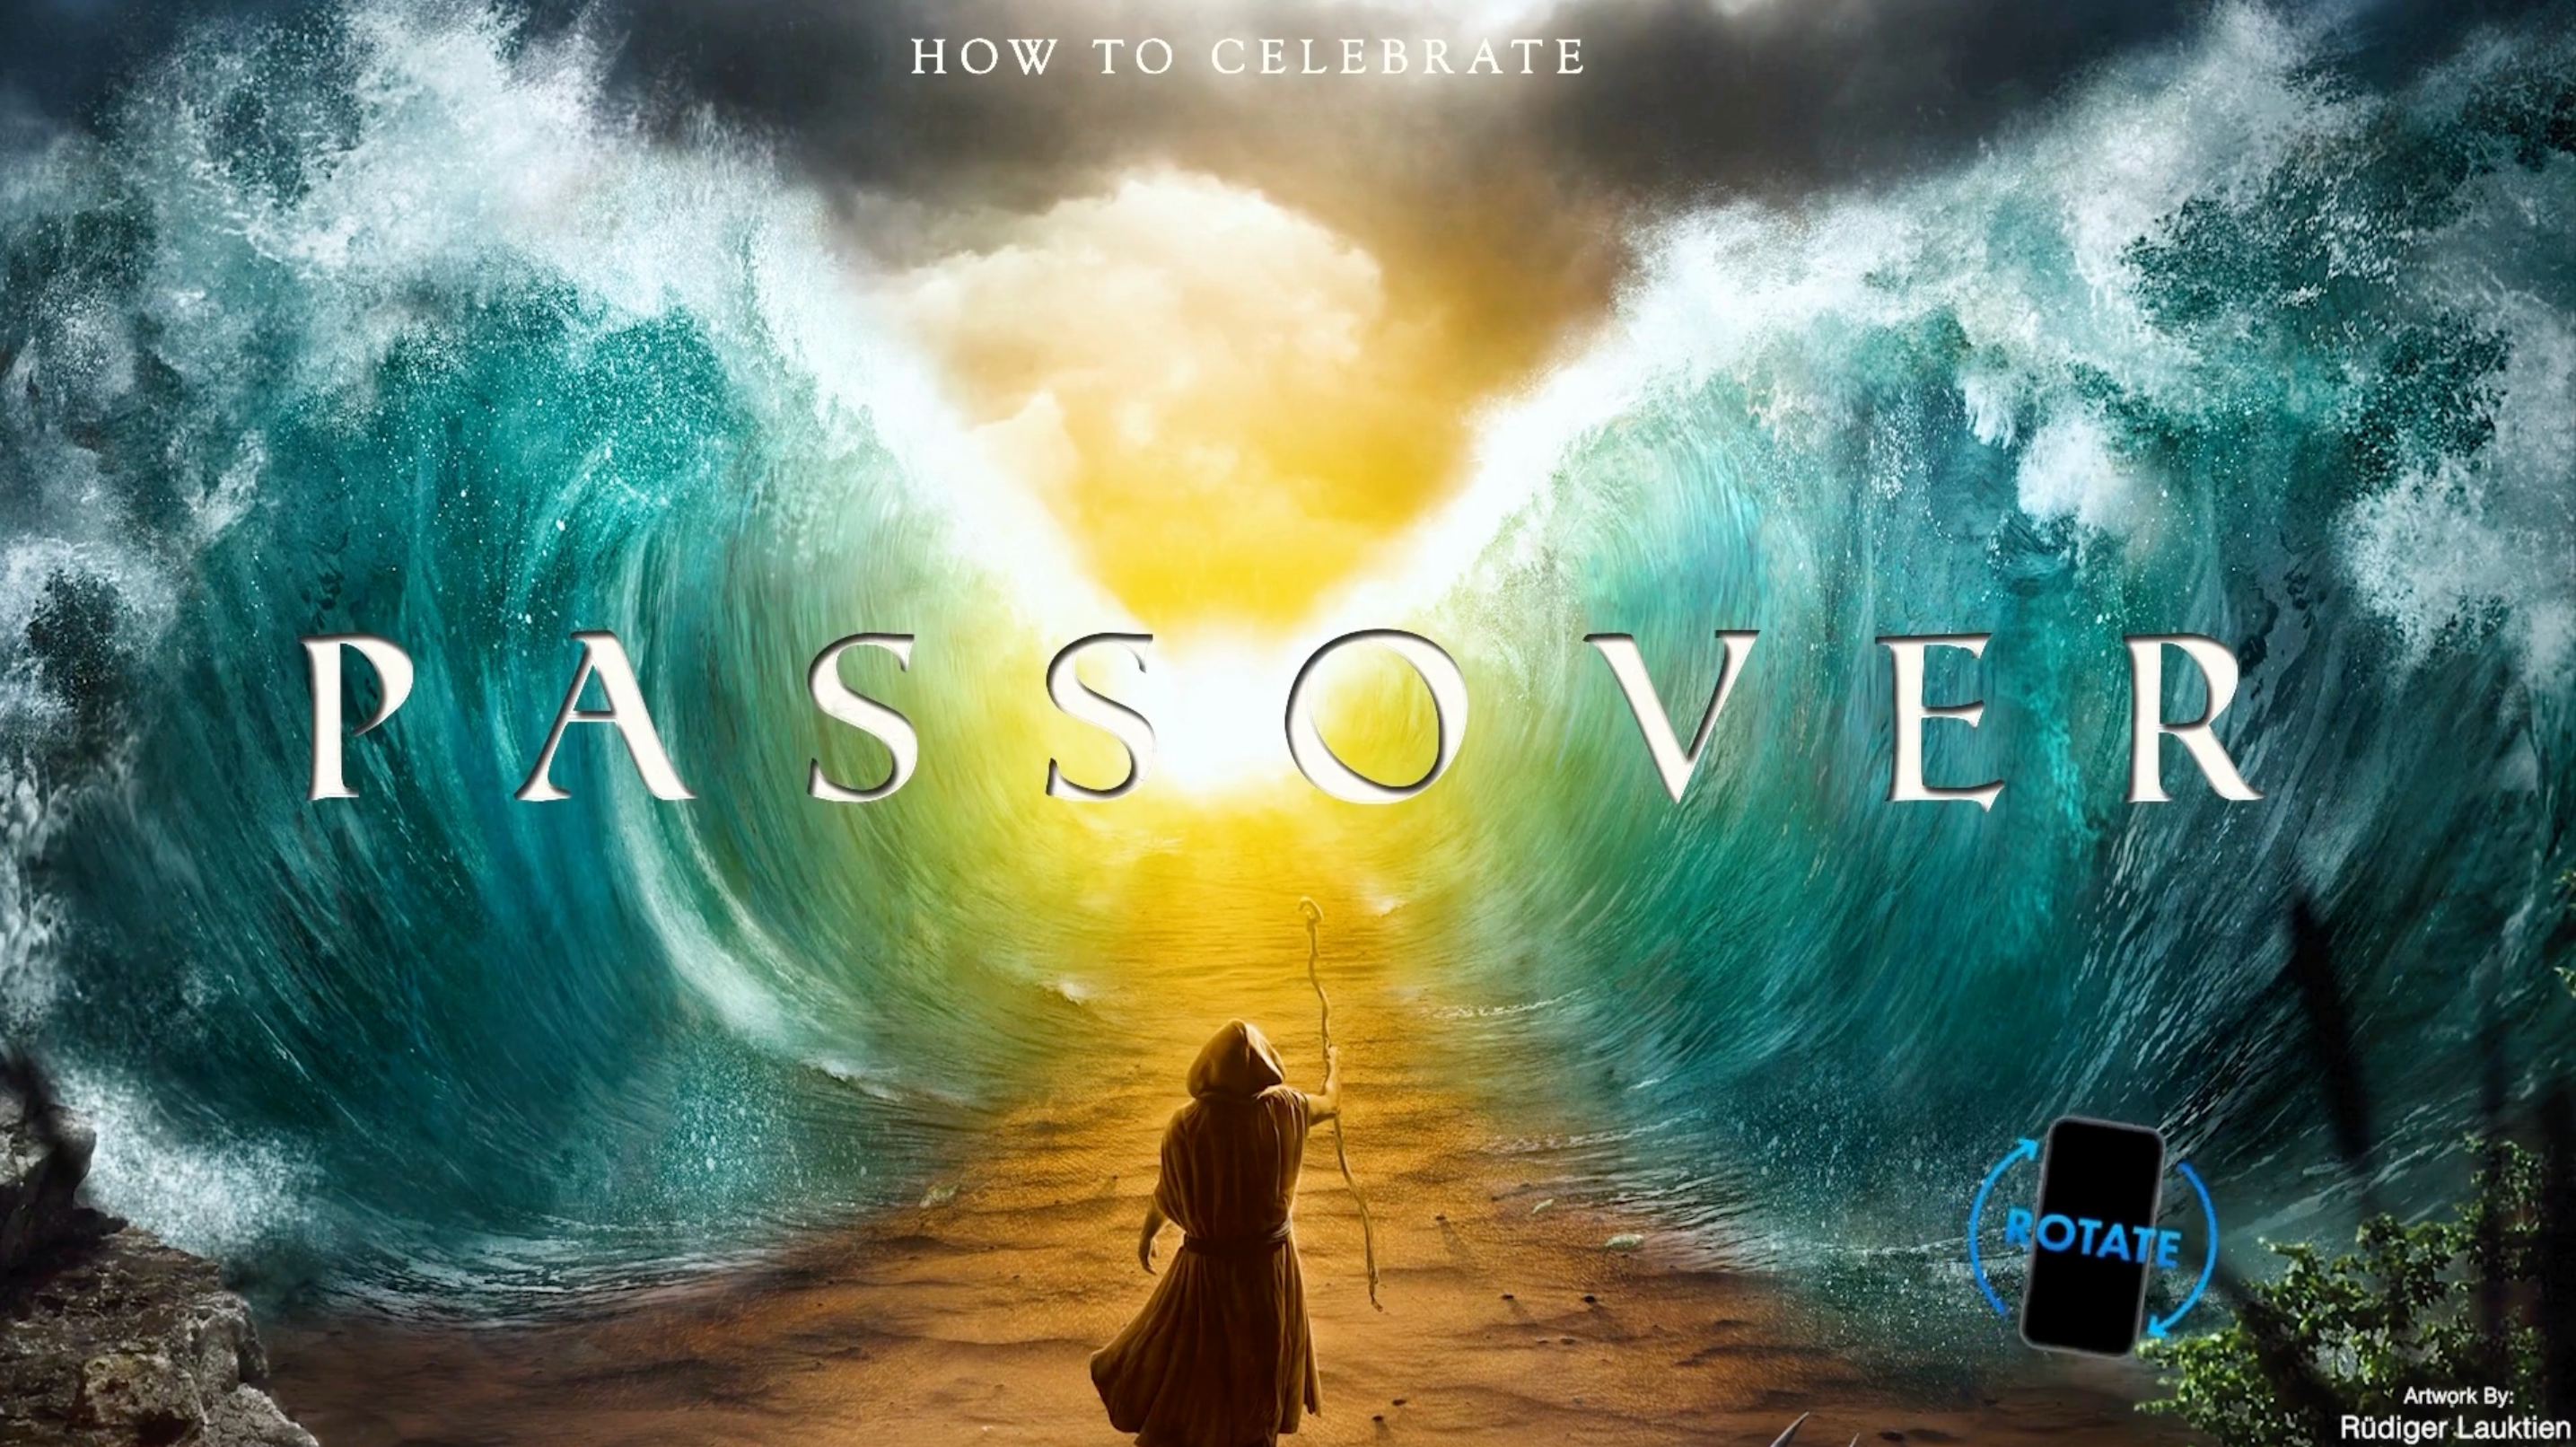 Load video: How to celebrate Passover with Seder plate walk through